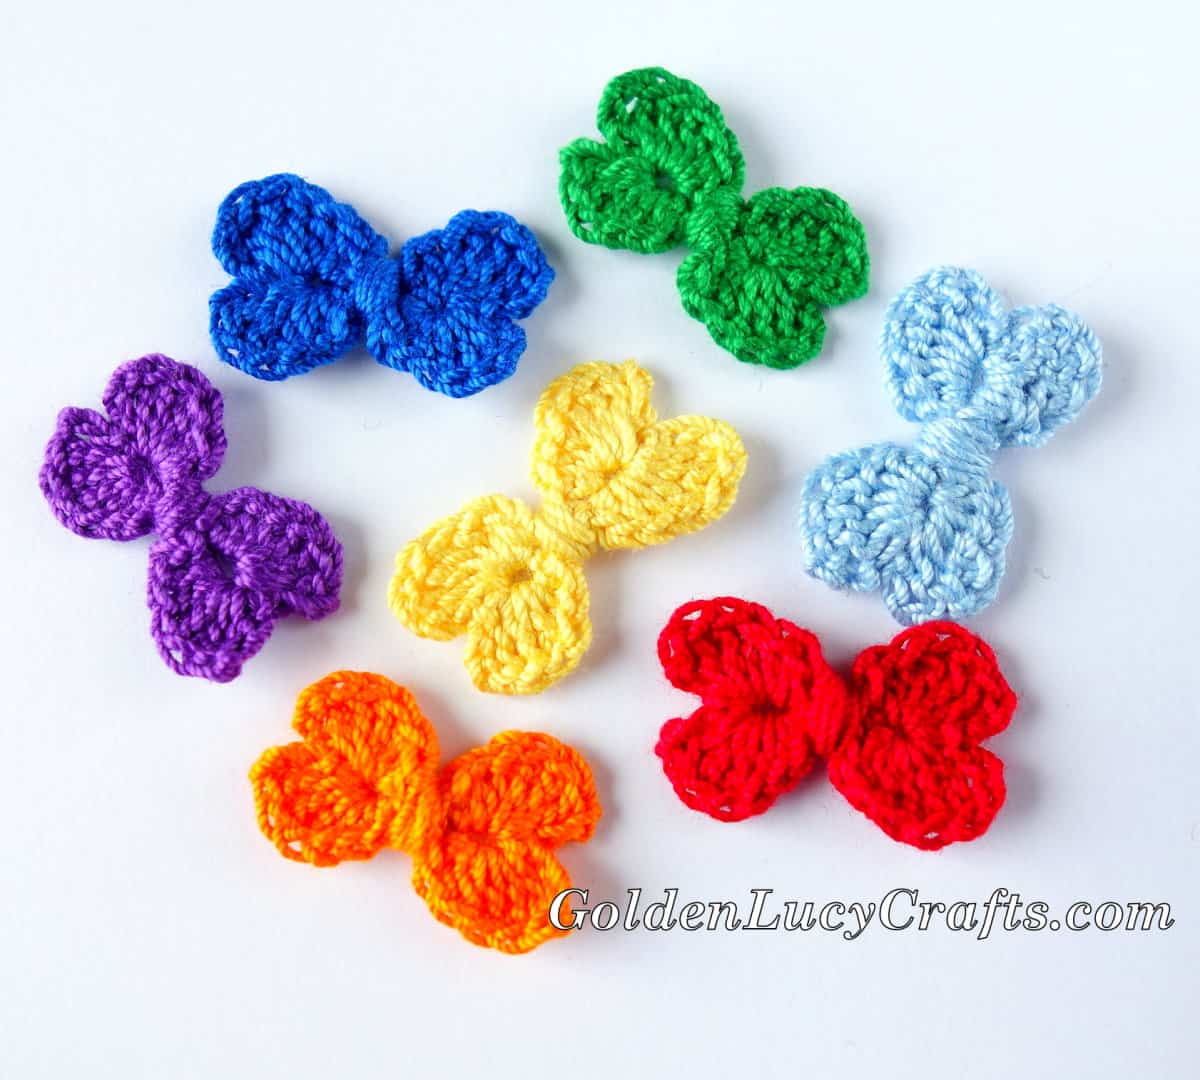 Seven crocheted small bows in colors of rainbow.